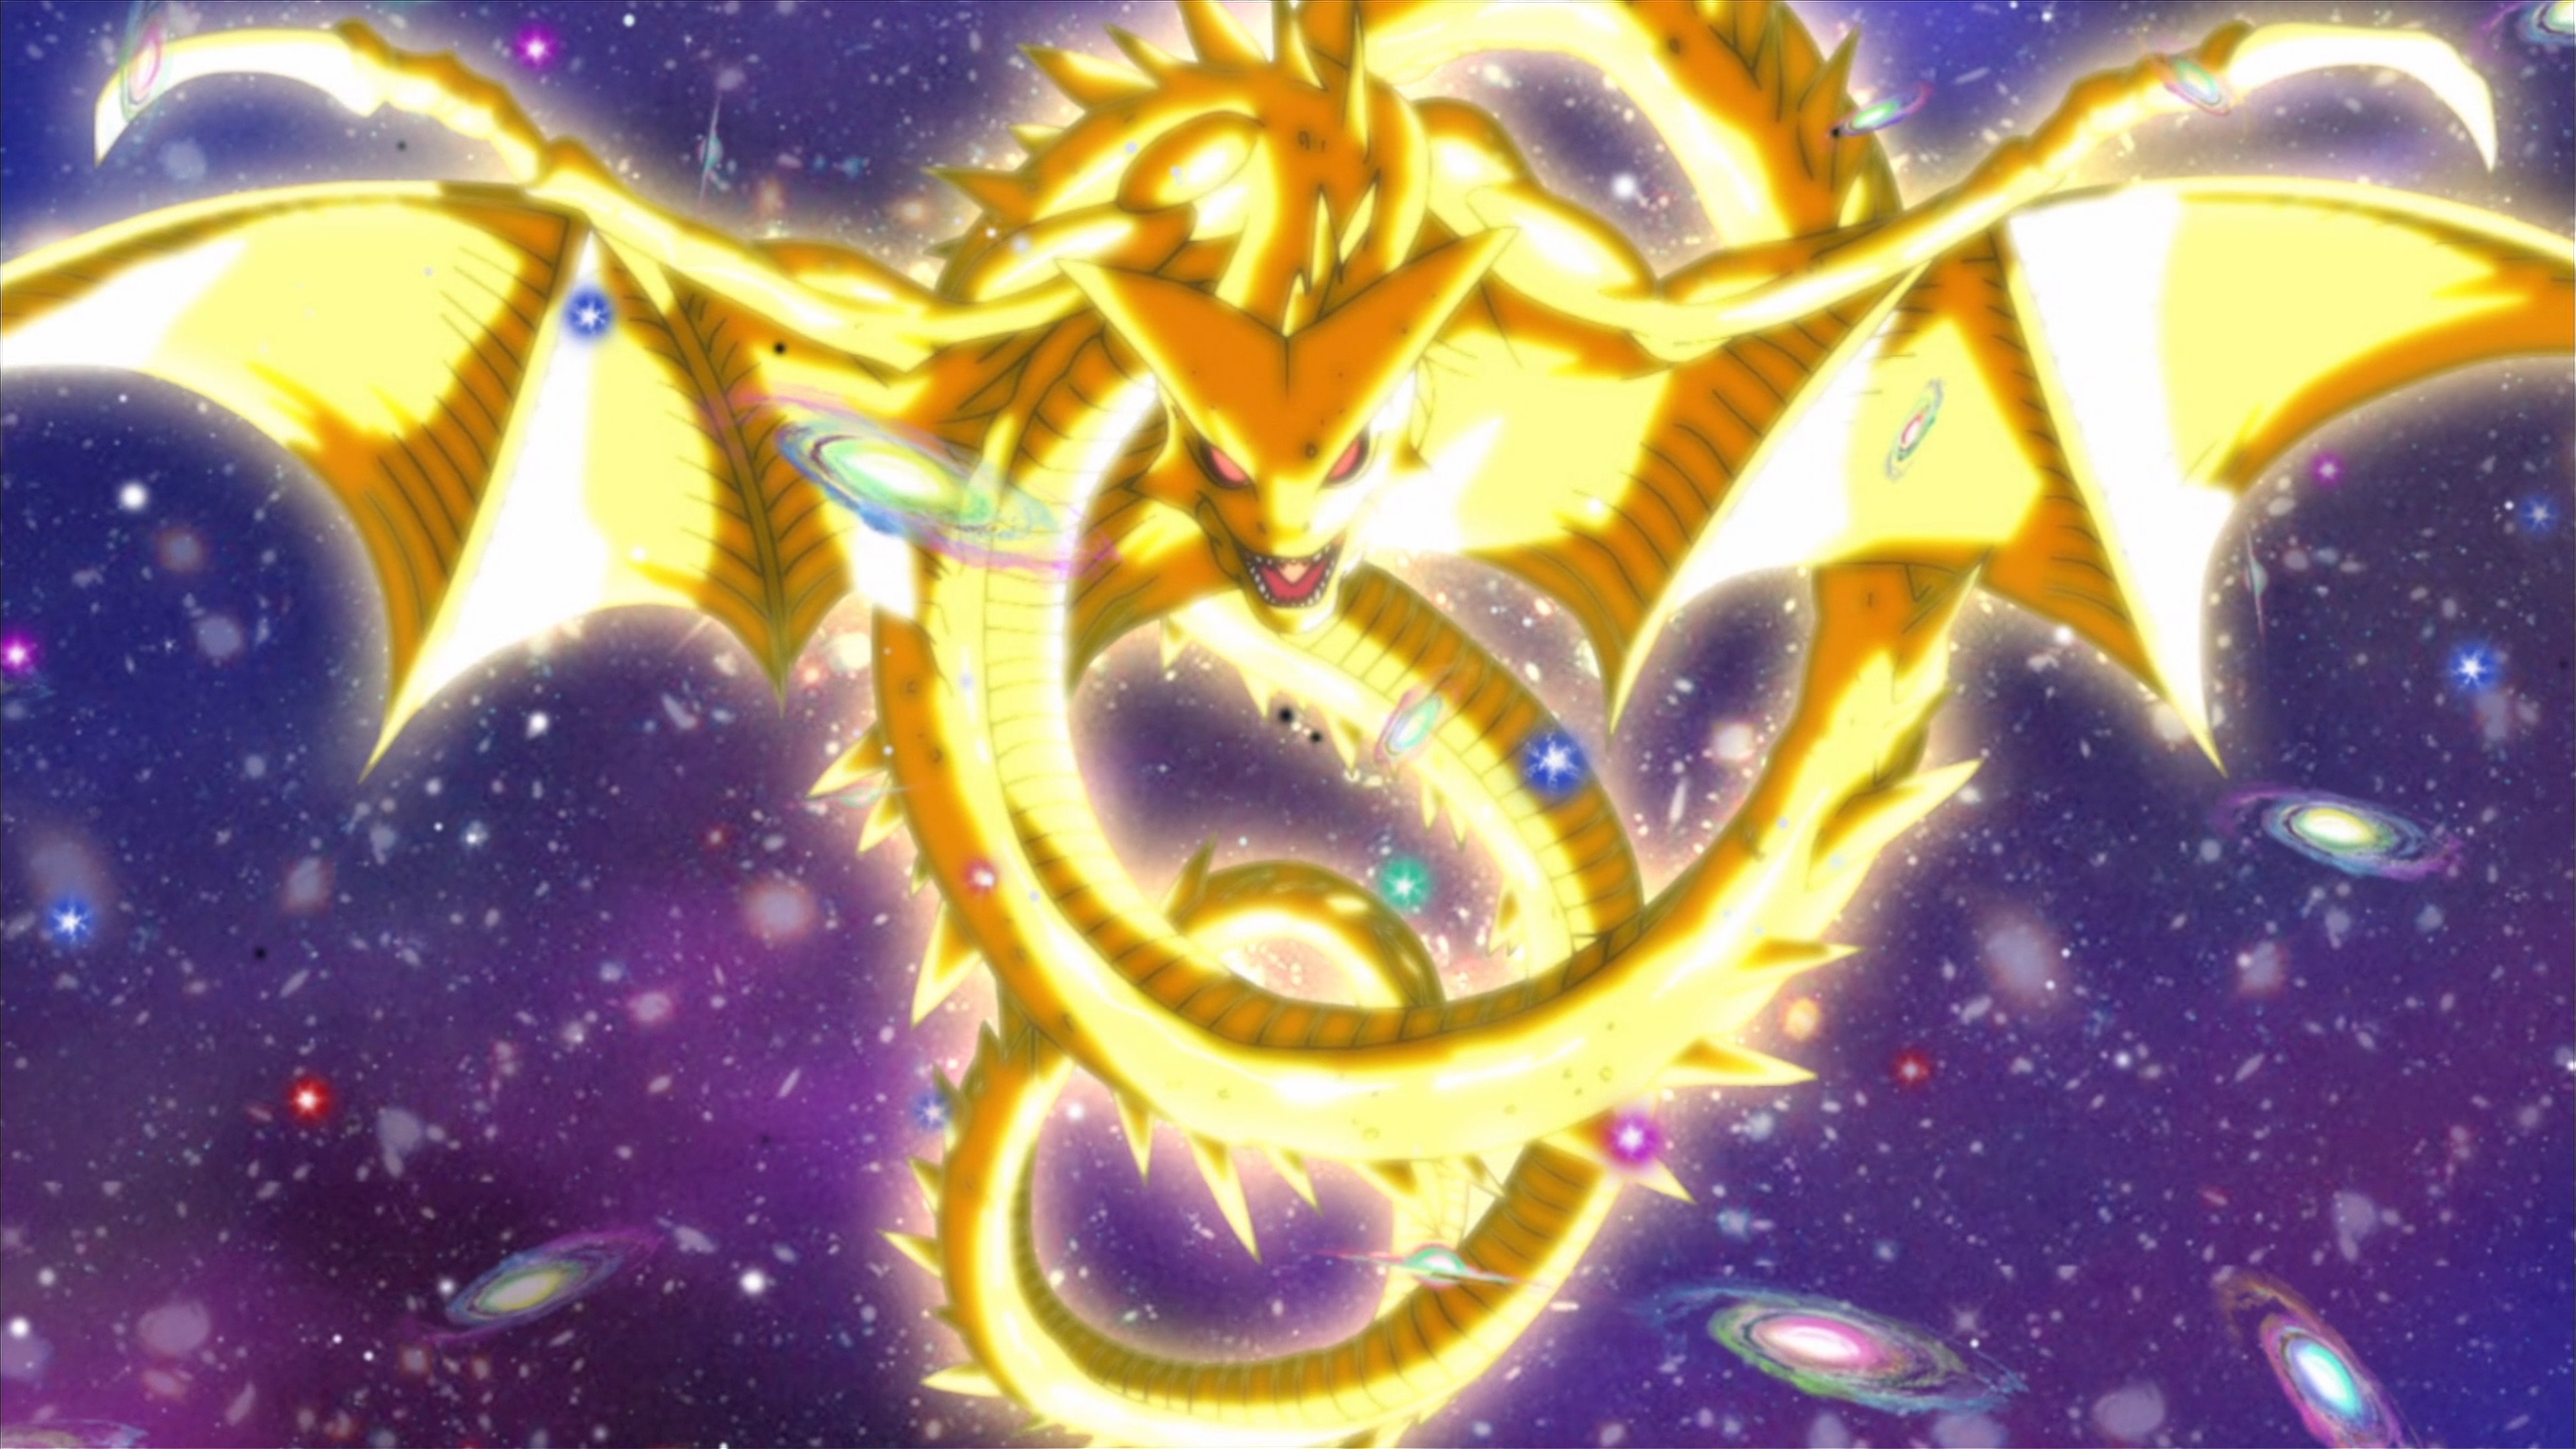 Dragon Ball FighterZ Shenron Summon Wish Translations and More New